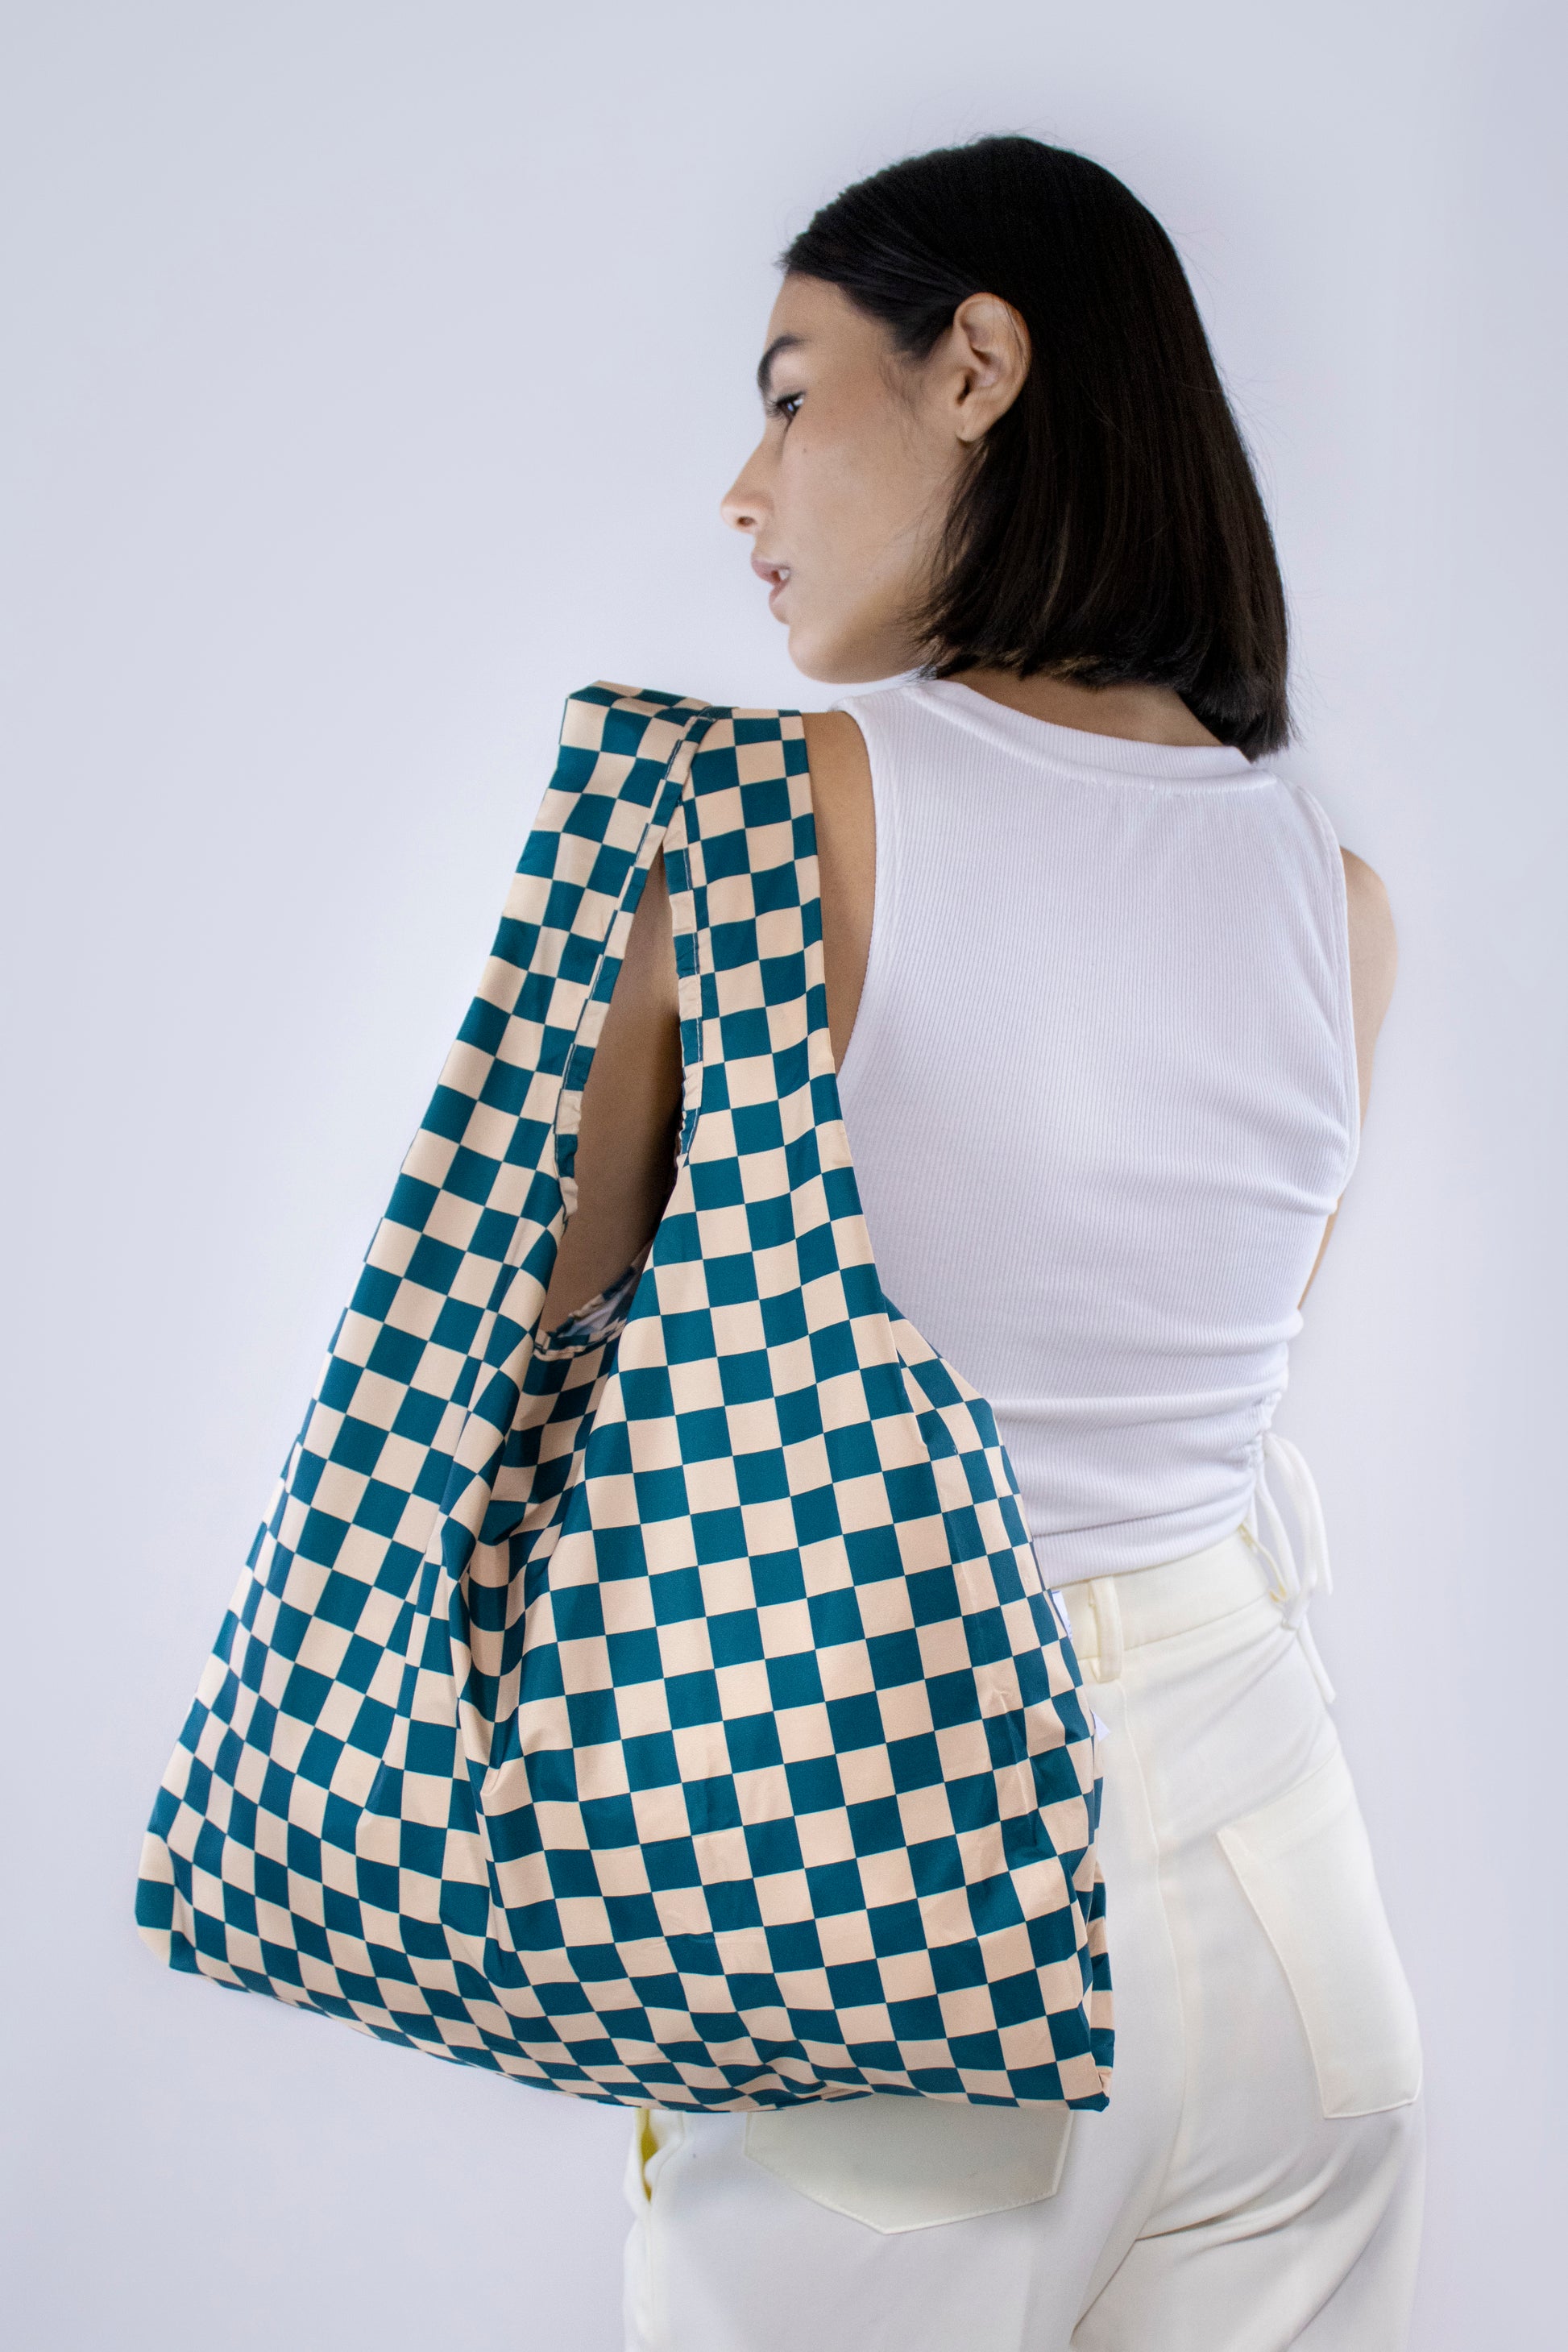 Kind Bag Recycled Plastic Reusable Bag Checkerboard Teal & Beige Singapore